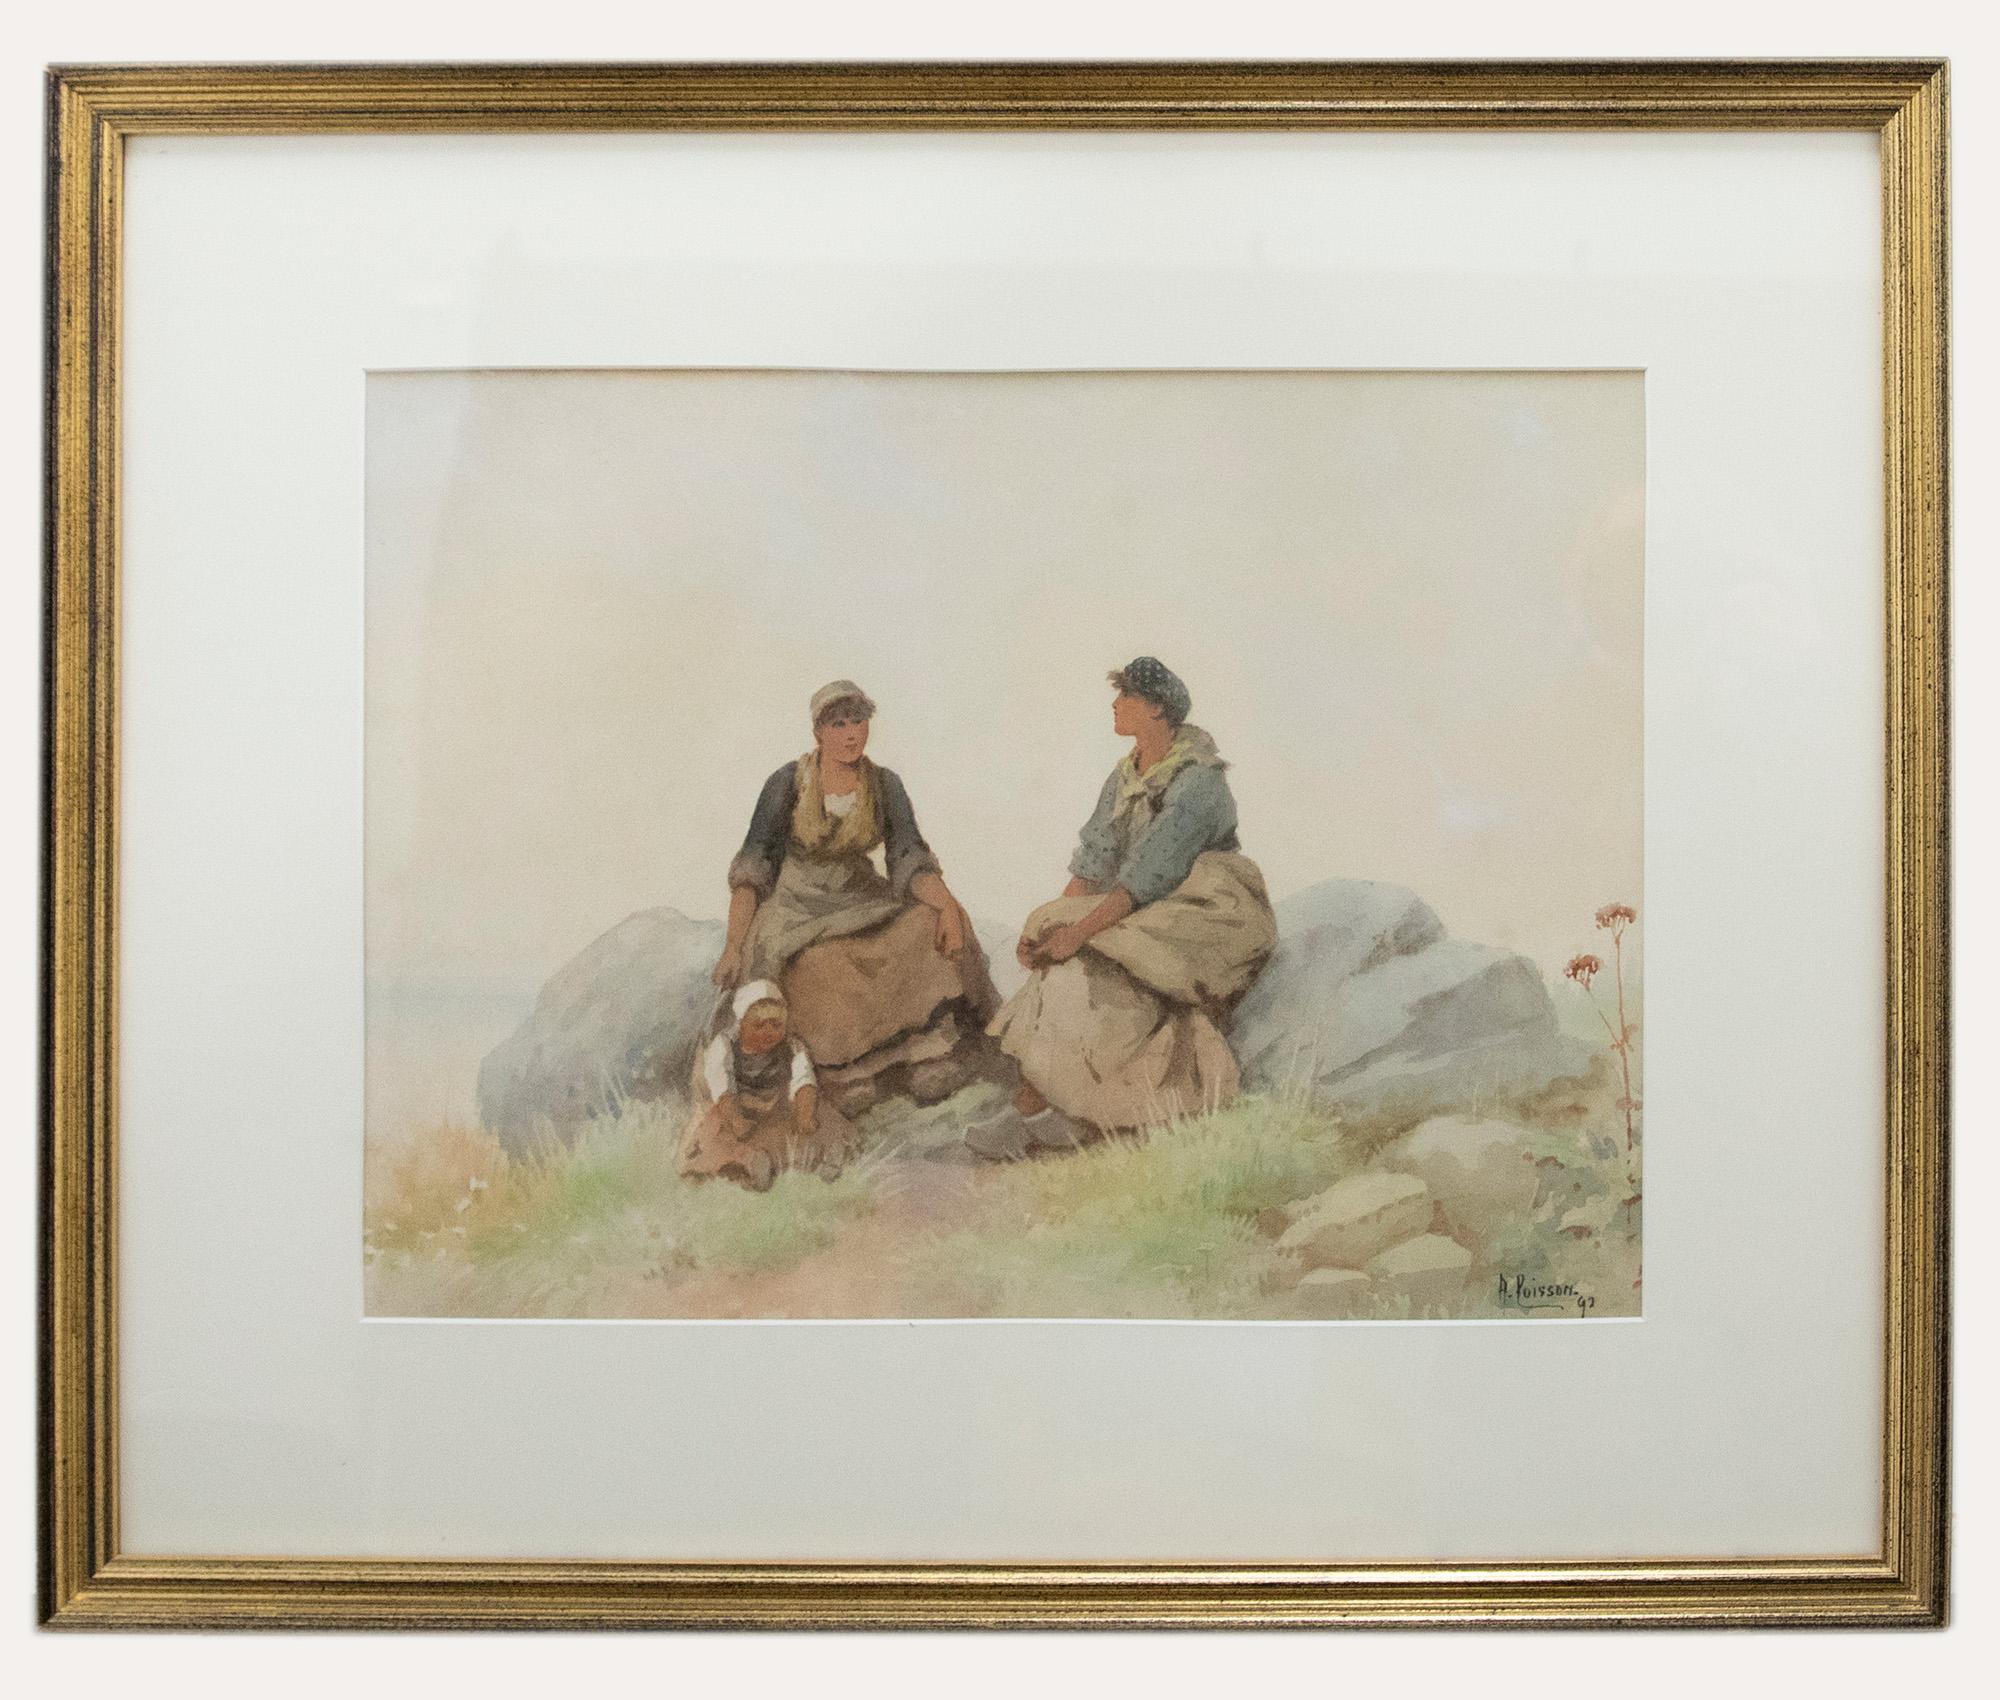 Unknown Figurative Art - A. Poisson - Framed Late 19th Century Watercolour, Dutch Women with Child